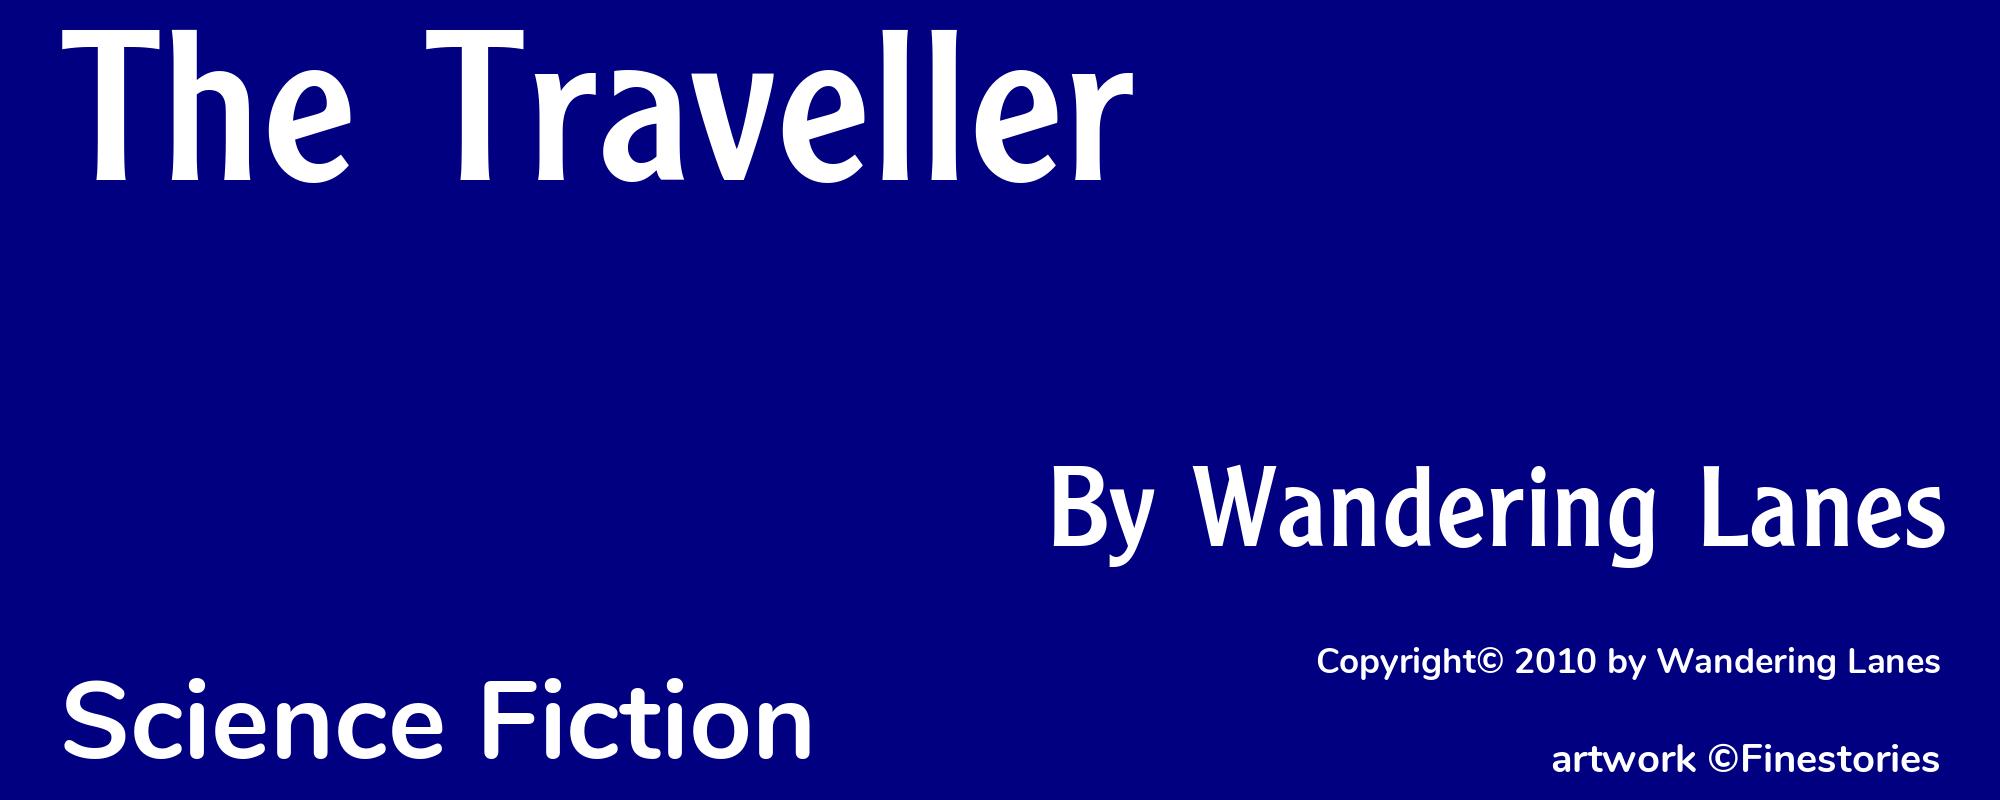 The Traveller - Cover